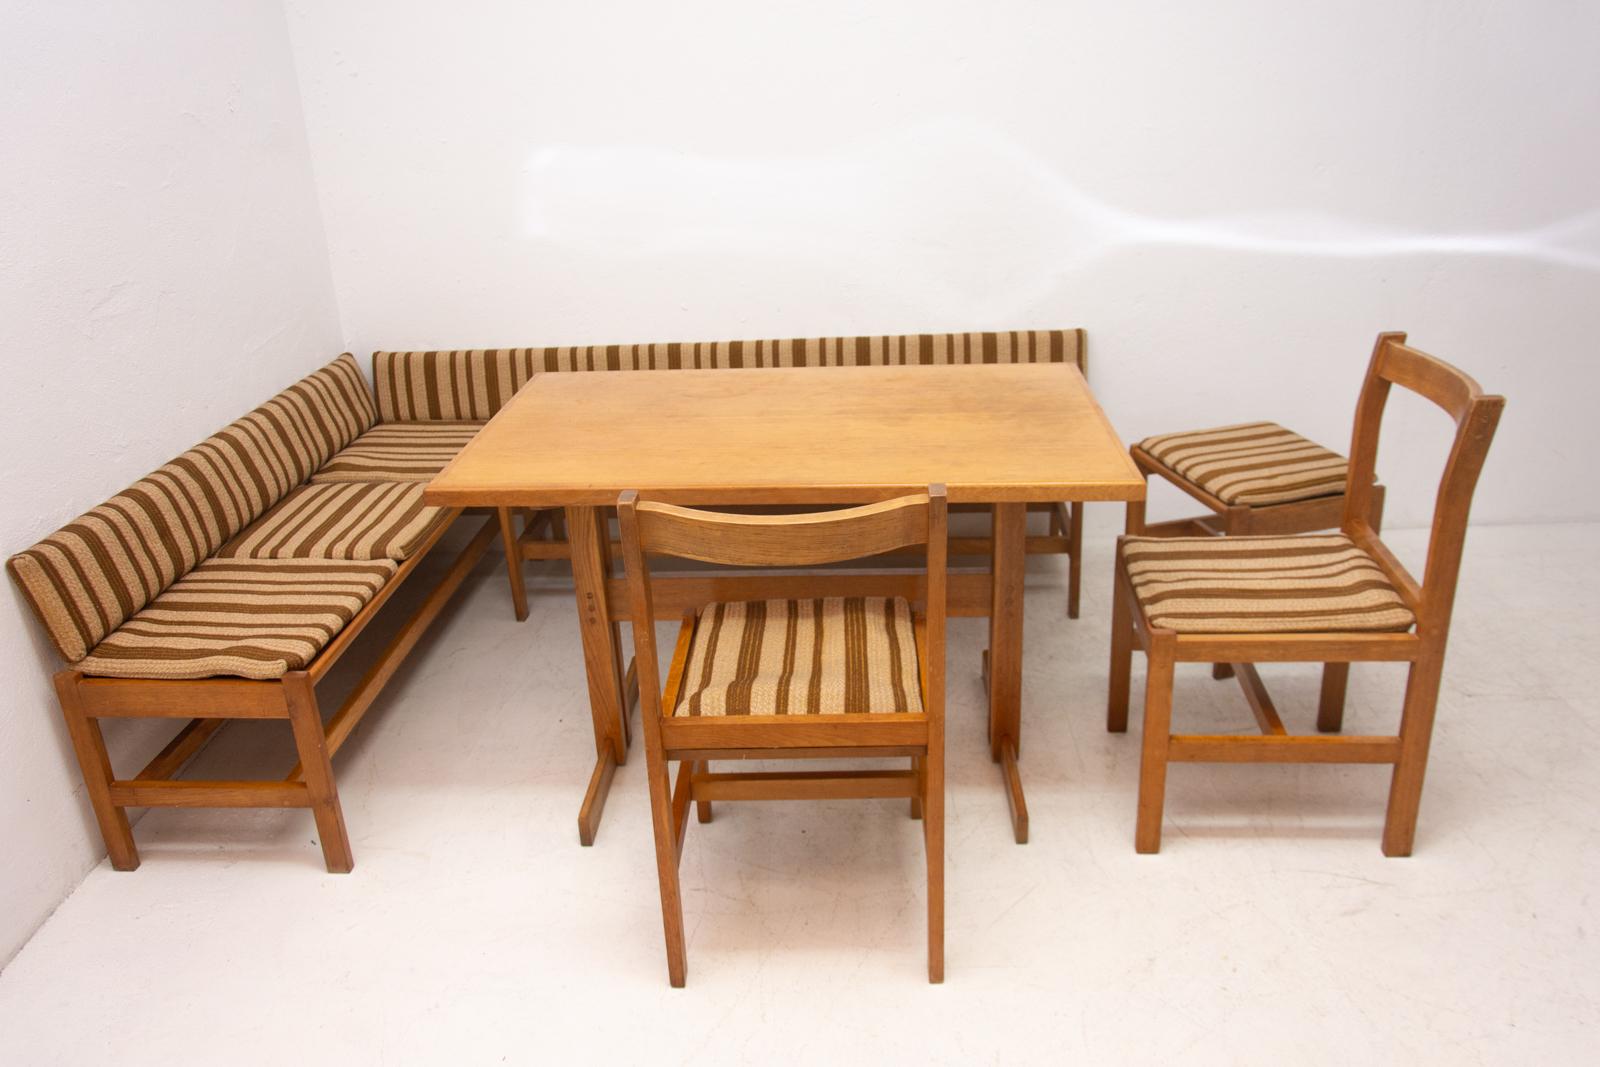 These dining room set was made by Krásná Jizba company in the 1950s.

It consist of a corner bench, a dining table, two chairs and one stool. It´s made of wood and fabric.

All in good vintage condition.

Price is for the